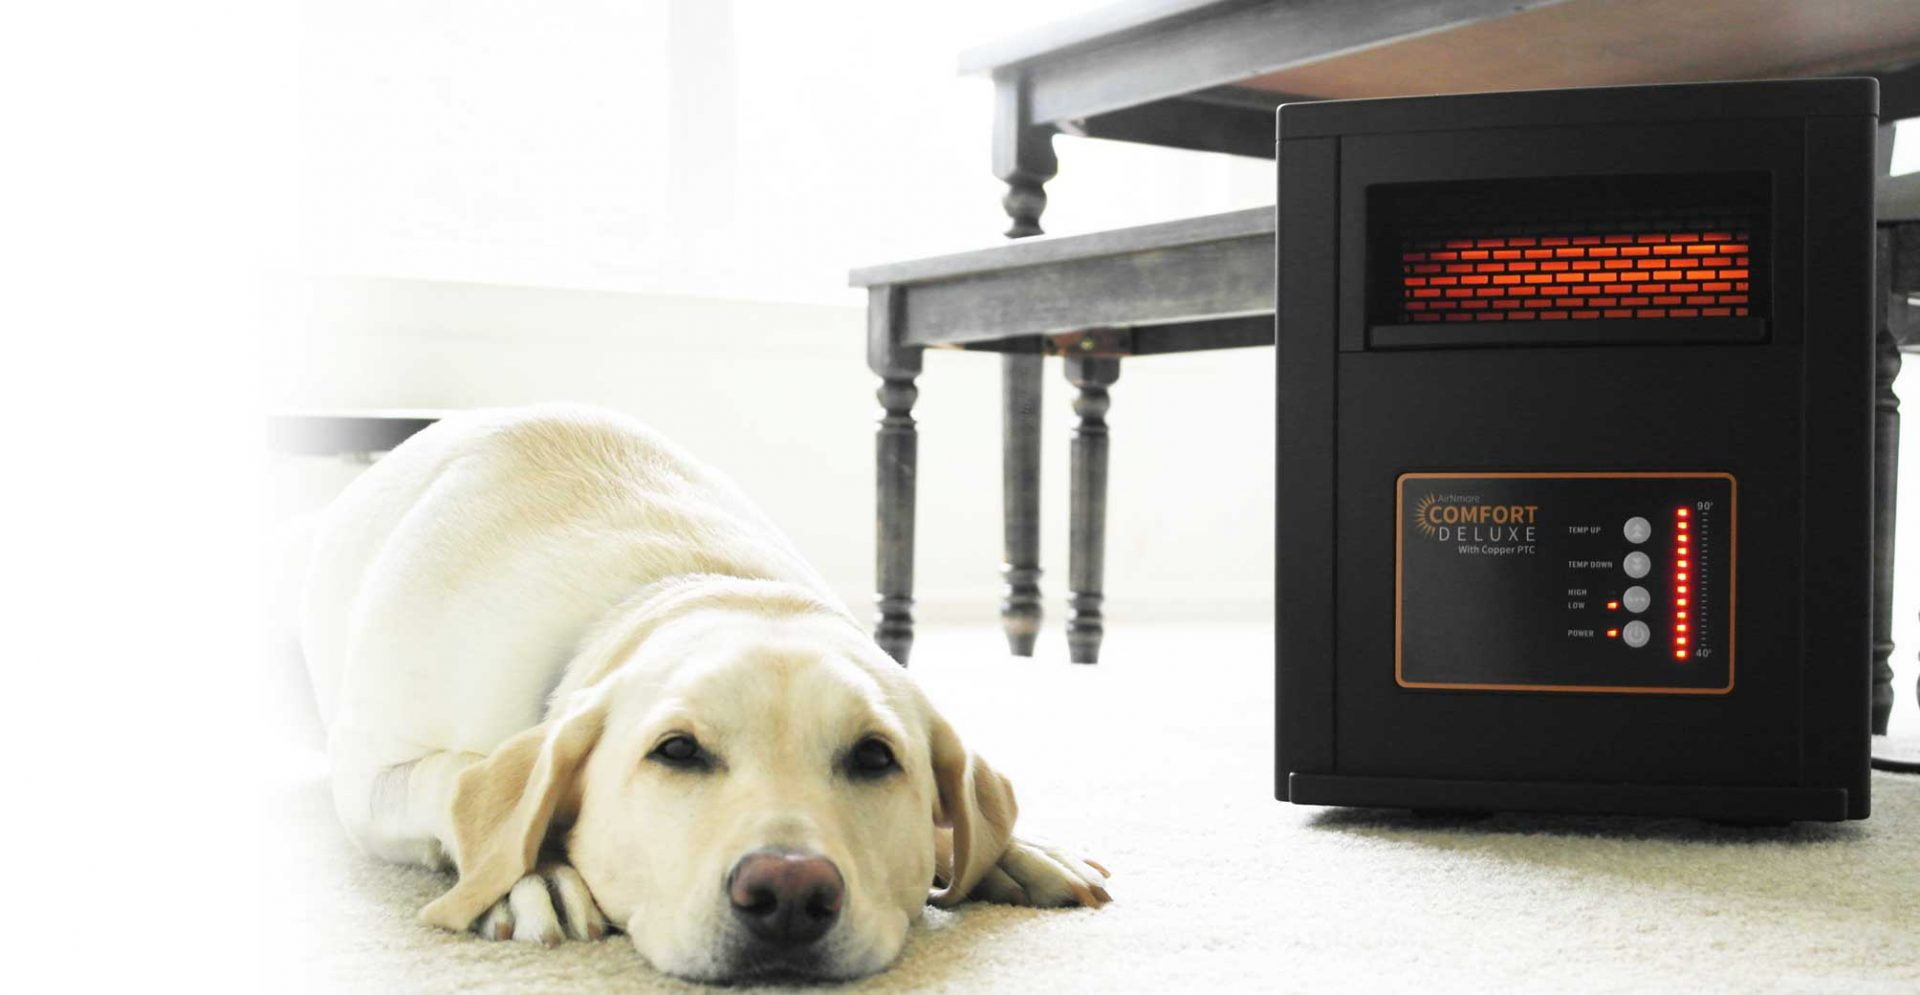 Space Heater Buying Guide